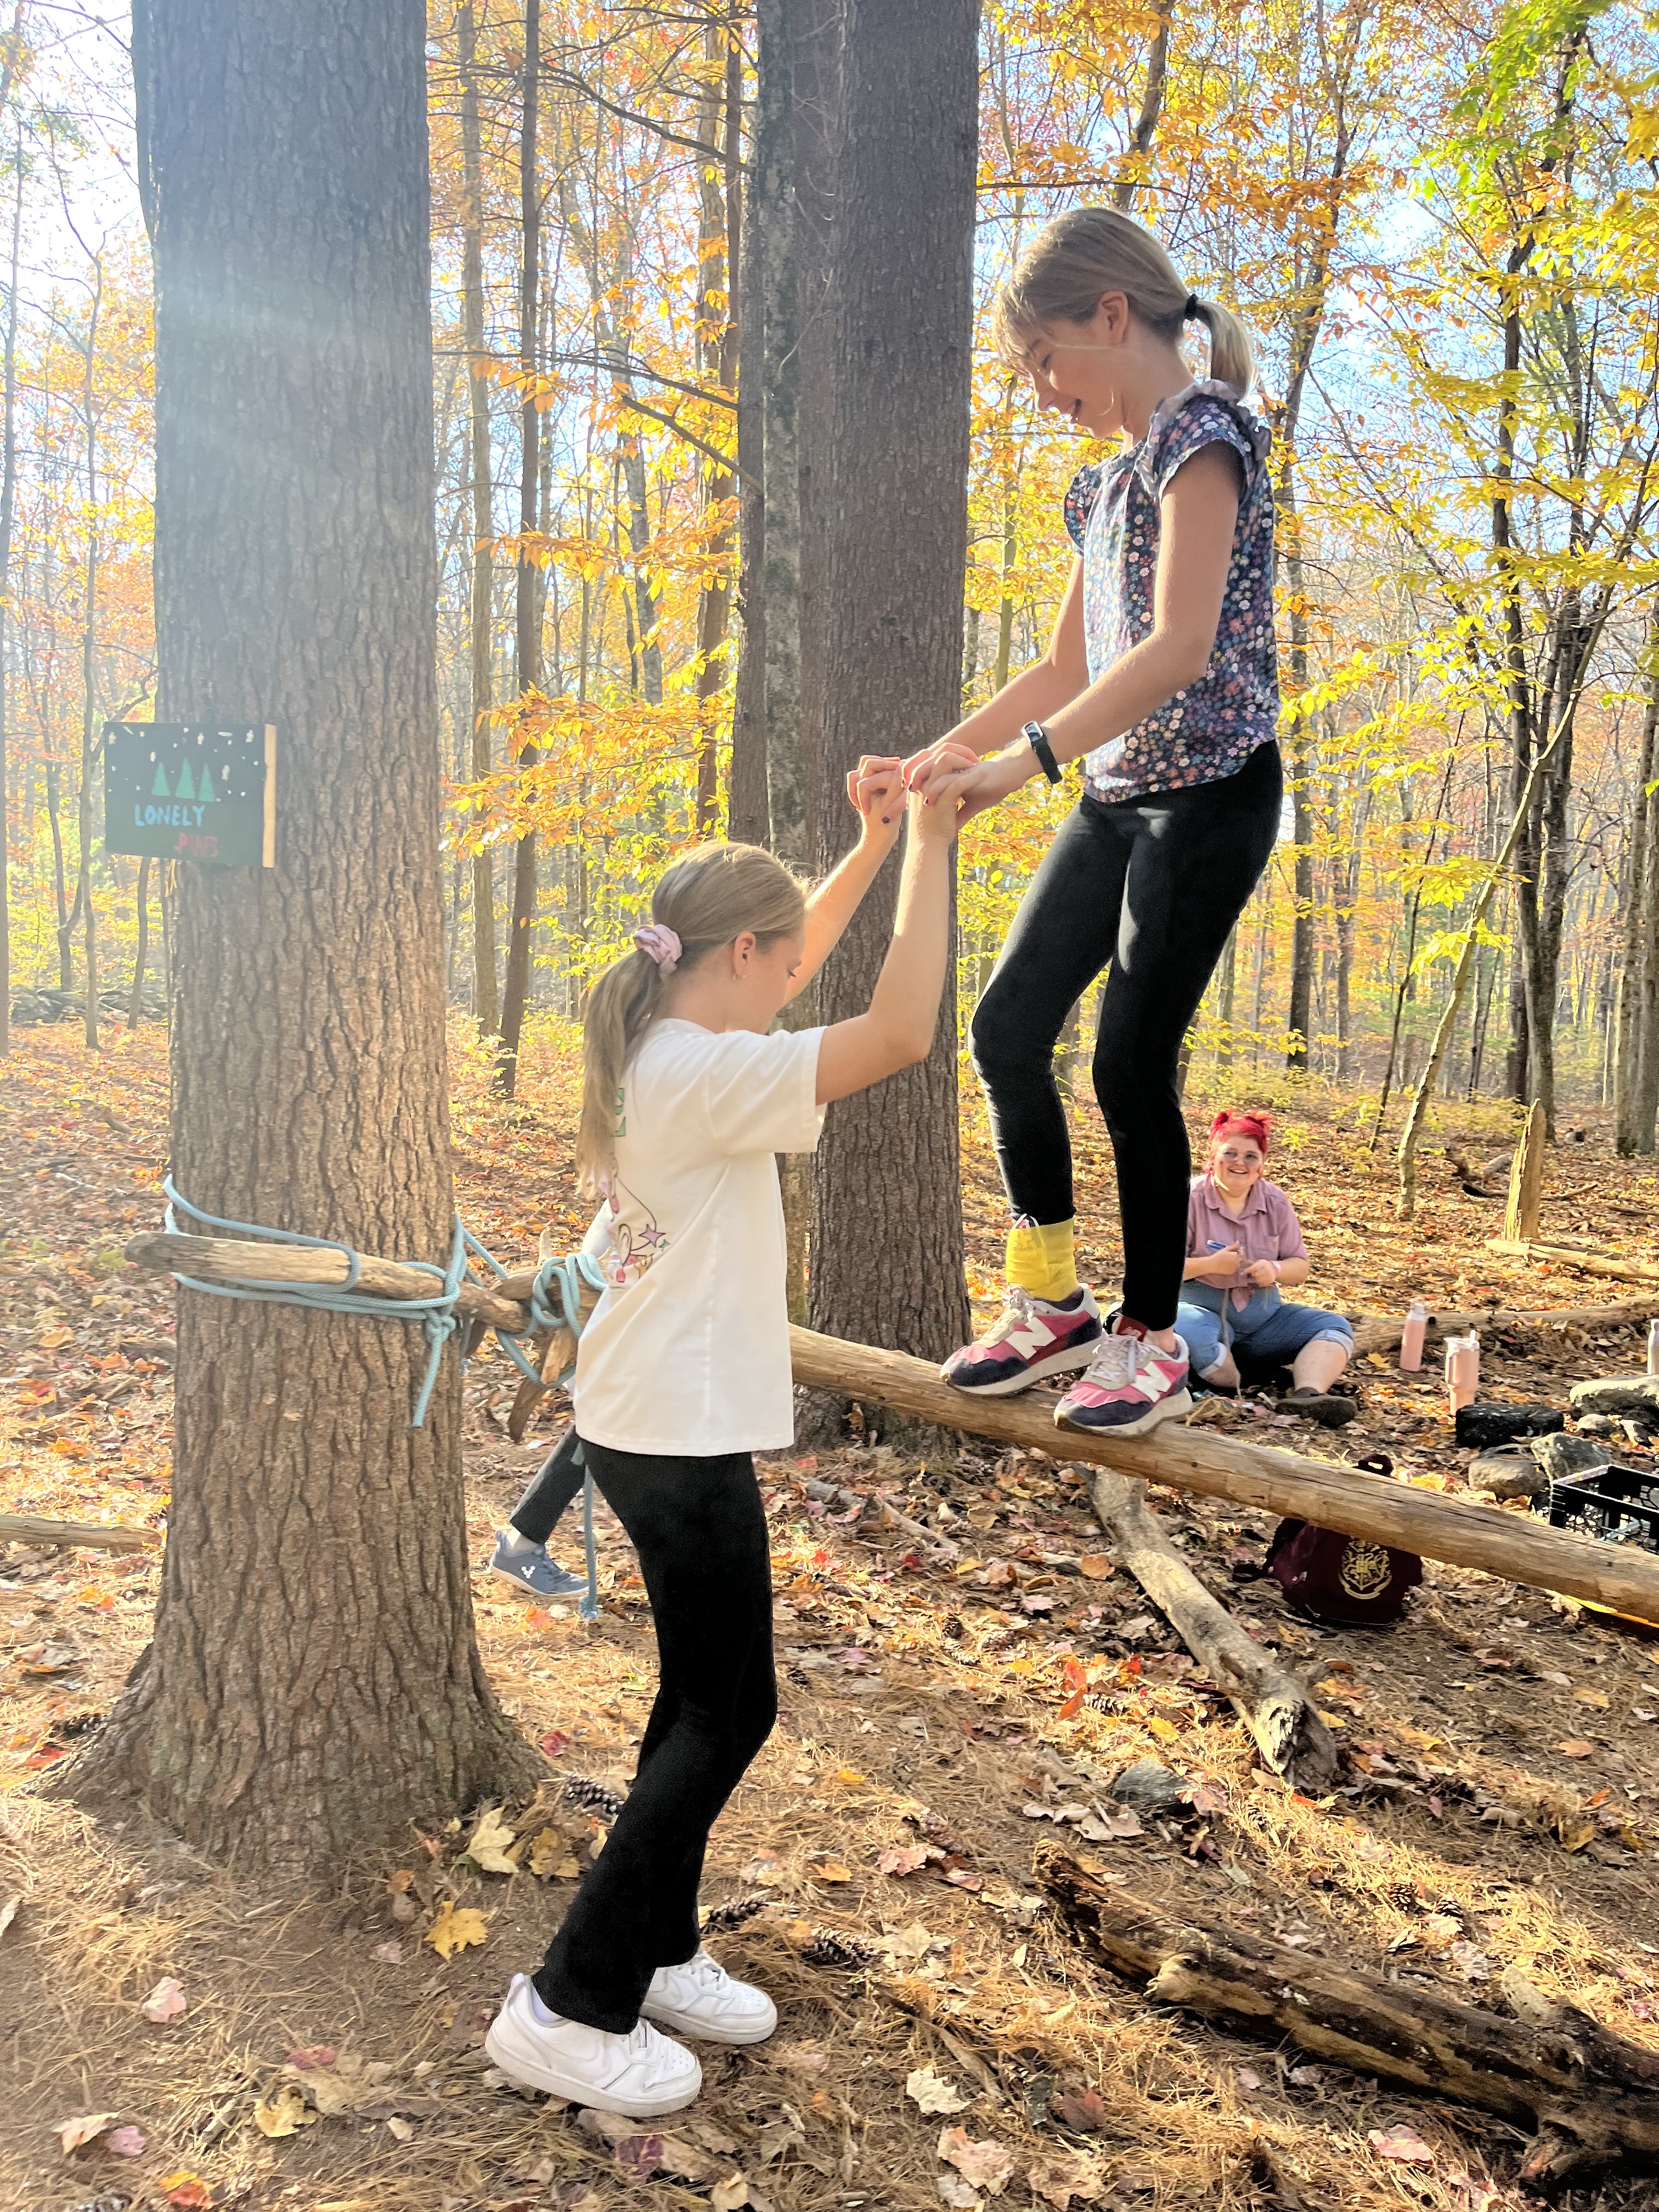 Fieldston Lower students help each other with ropes course at Nature's Classroom.